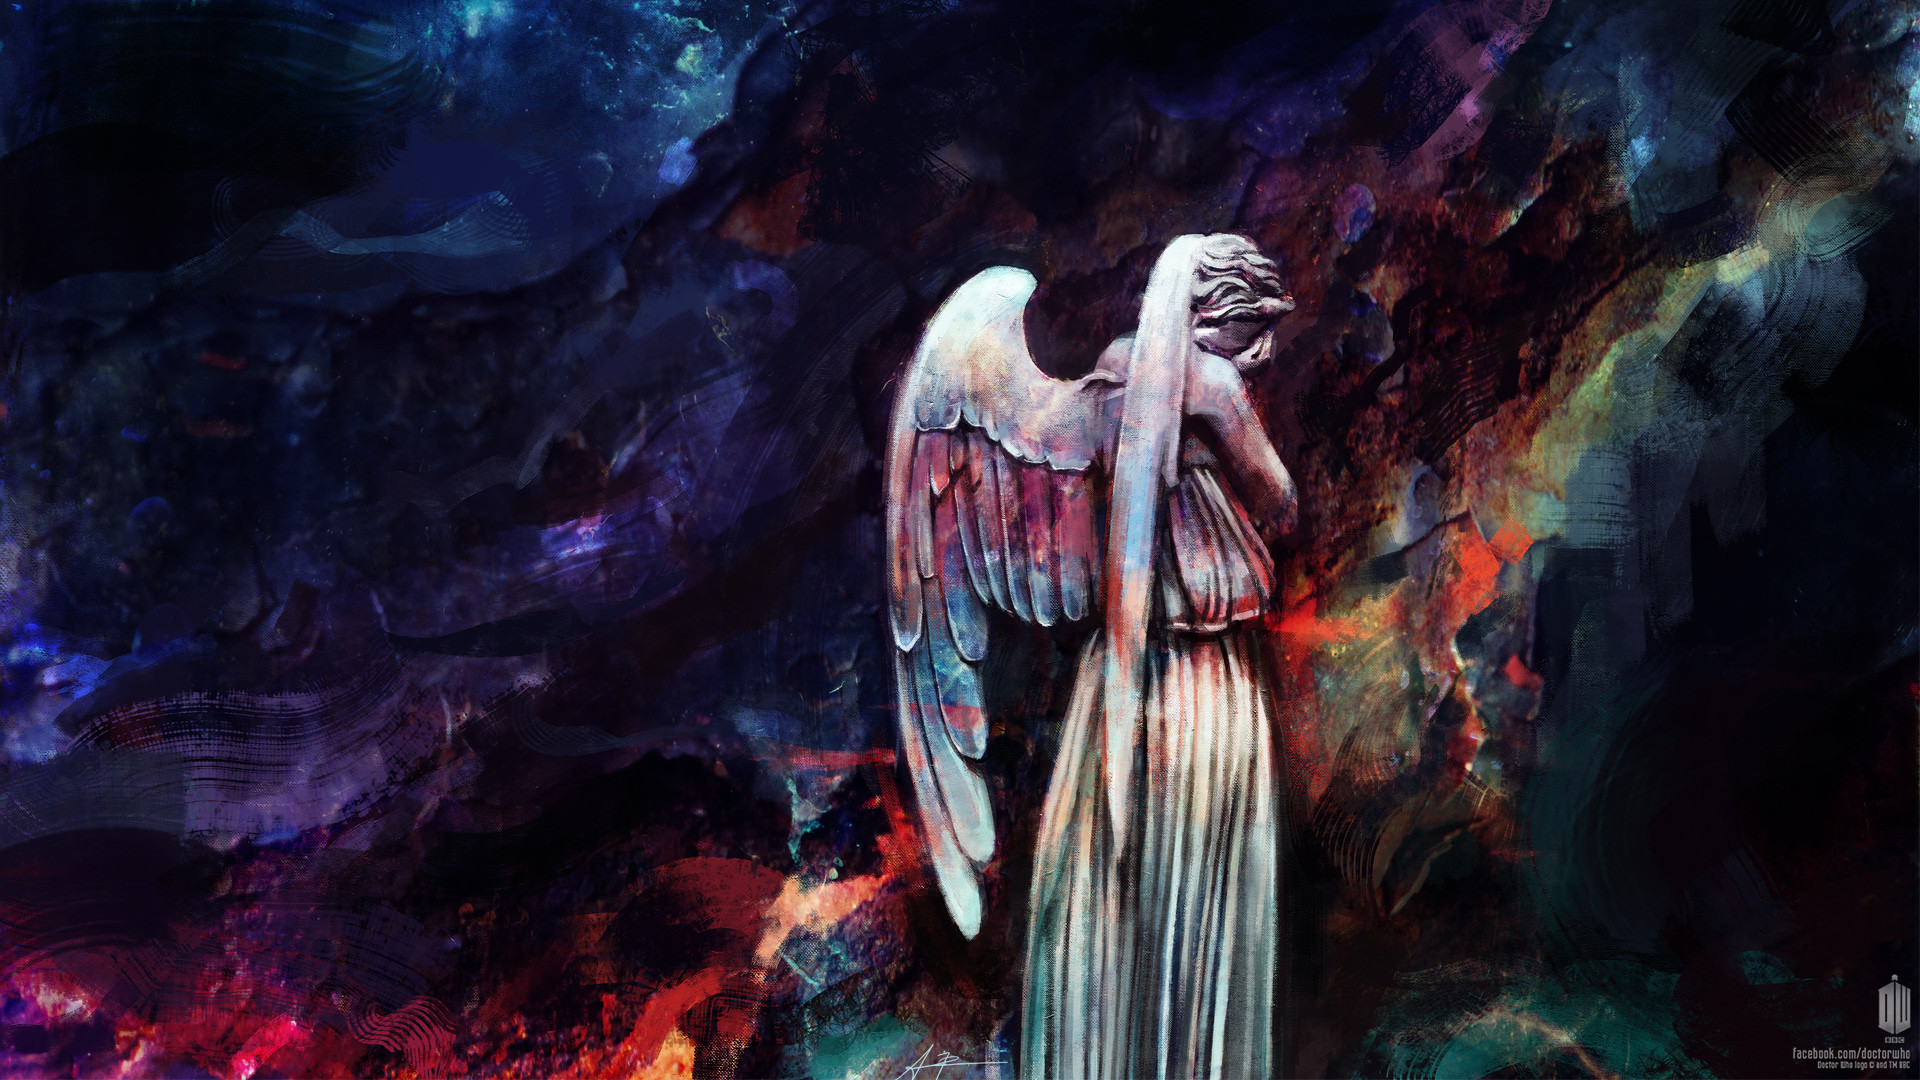 1920x1080, Wallpapers Gallery - Doctor Who Weeping Angels - HD Wallpaper 